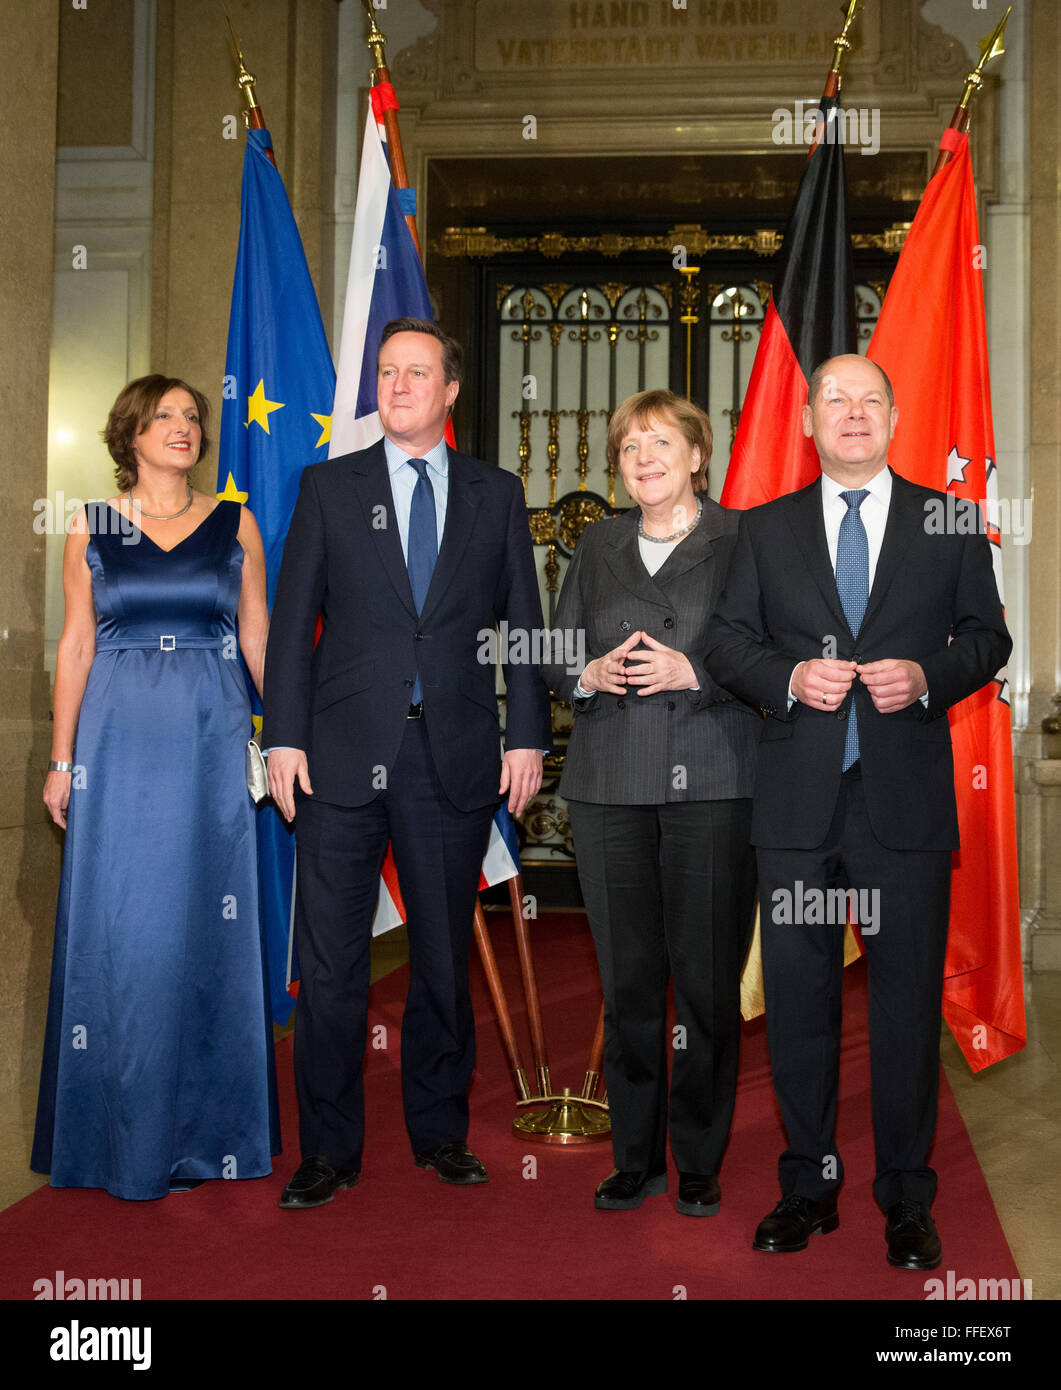 Hamburg, Germany. 12th Feb, 2016. Chancellor Angela Merkel (CDU, 2nd r), British Premier David Cameron (2nd l), Mayor of Hamburg Olaf Scholz (SPD, r) and his wife Britta Ernst (l) together at the city hall of Hamburg, Germany, 12 February 2016. Merkel and Cameron are guests of honour at the oldest feast in the world. Since 1356, the governance of the Hanse city invites to the Matthiae dinner. PHOTO: CHRISTIAN CHARISIUS/dpa/Alamy Live News Stock Photo